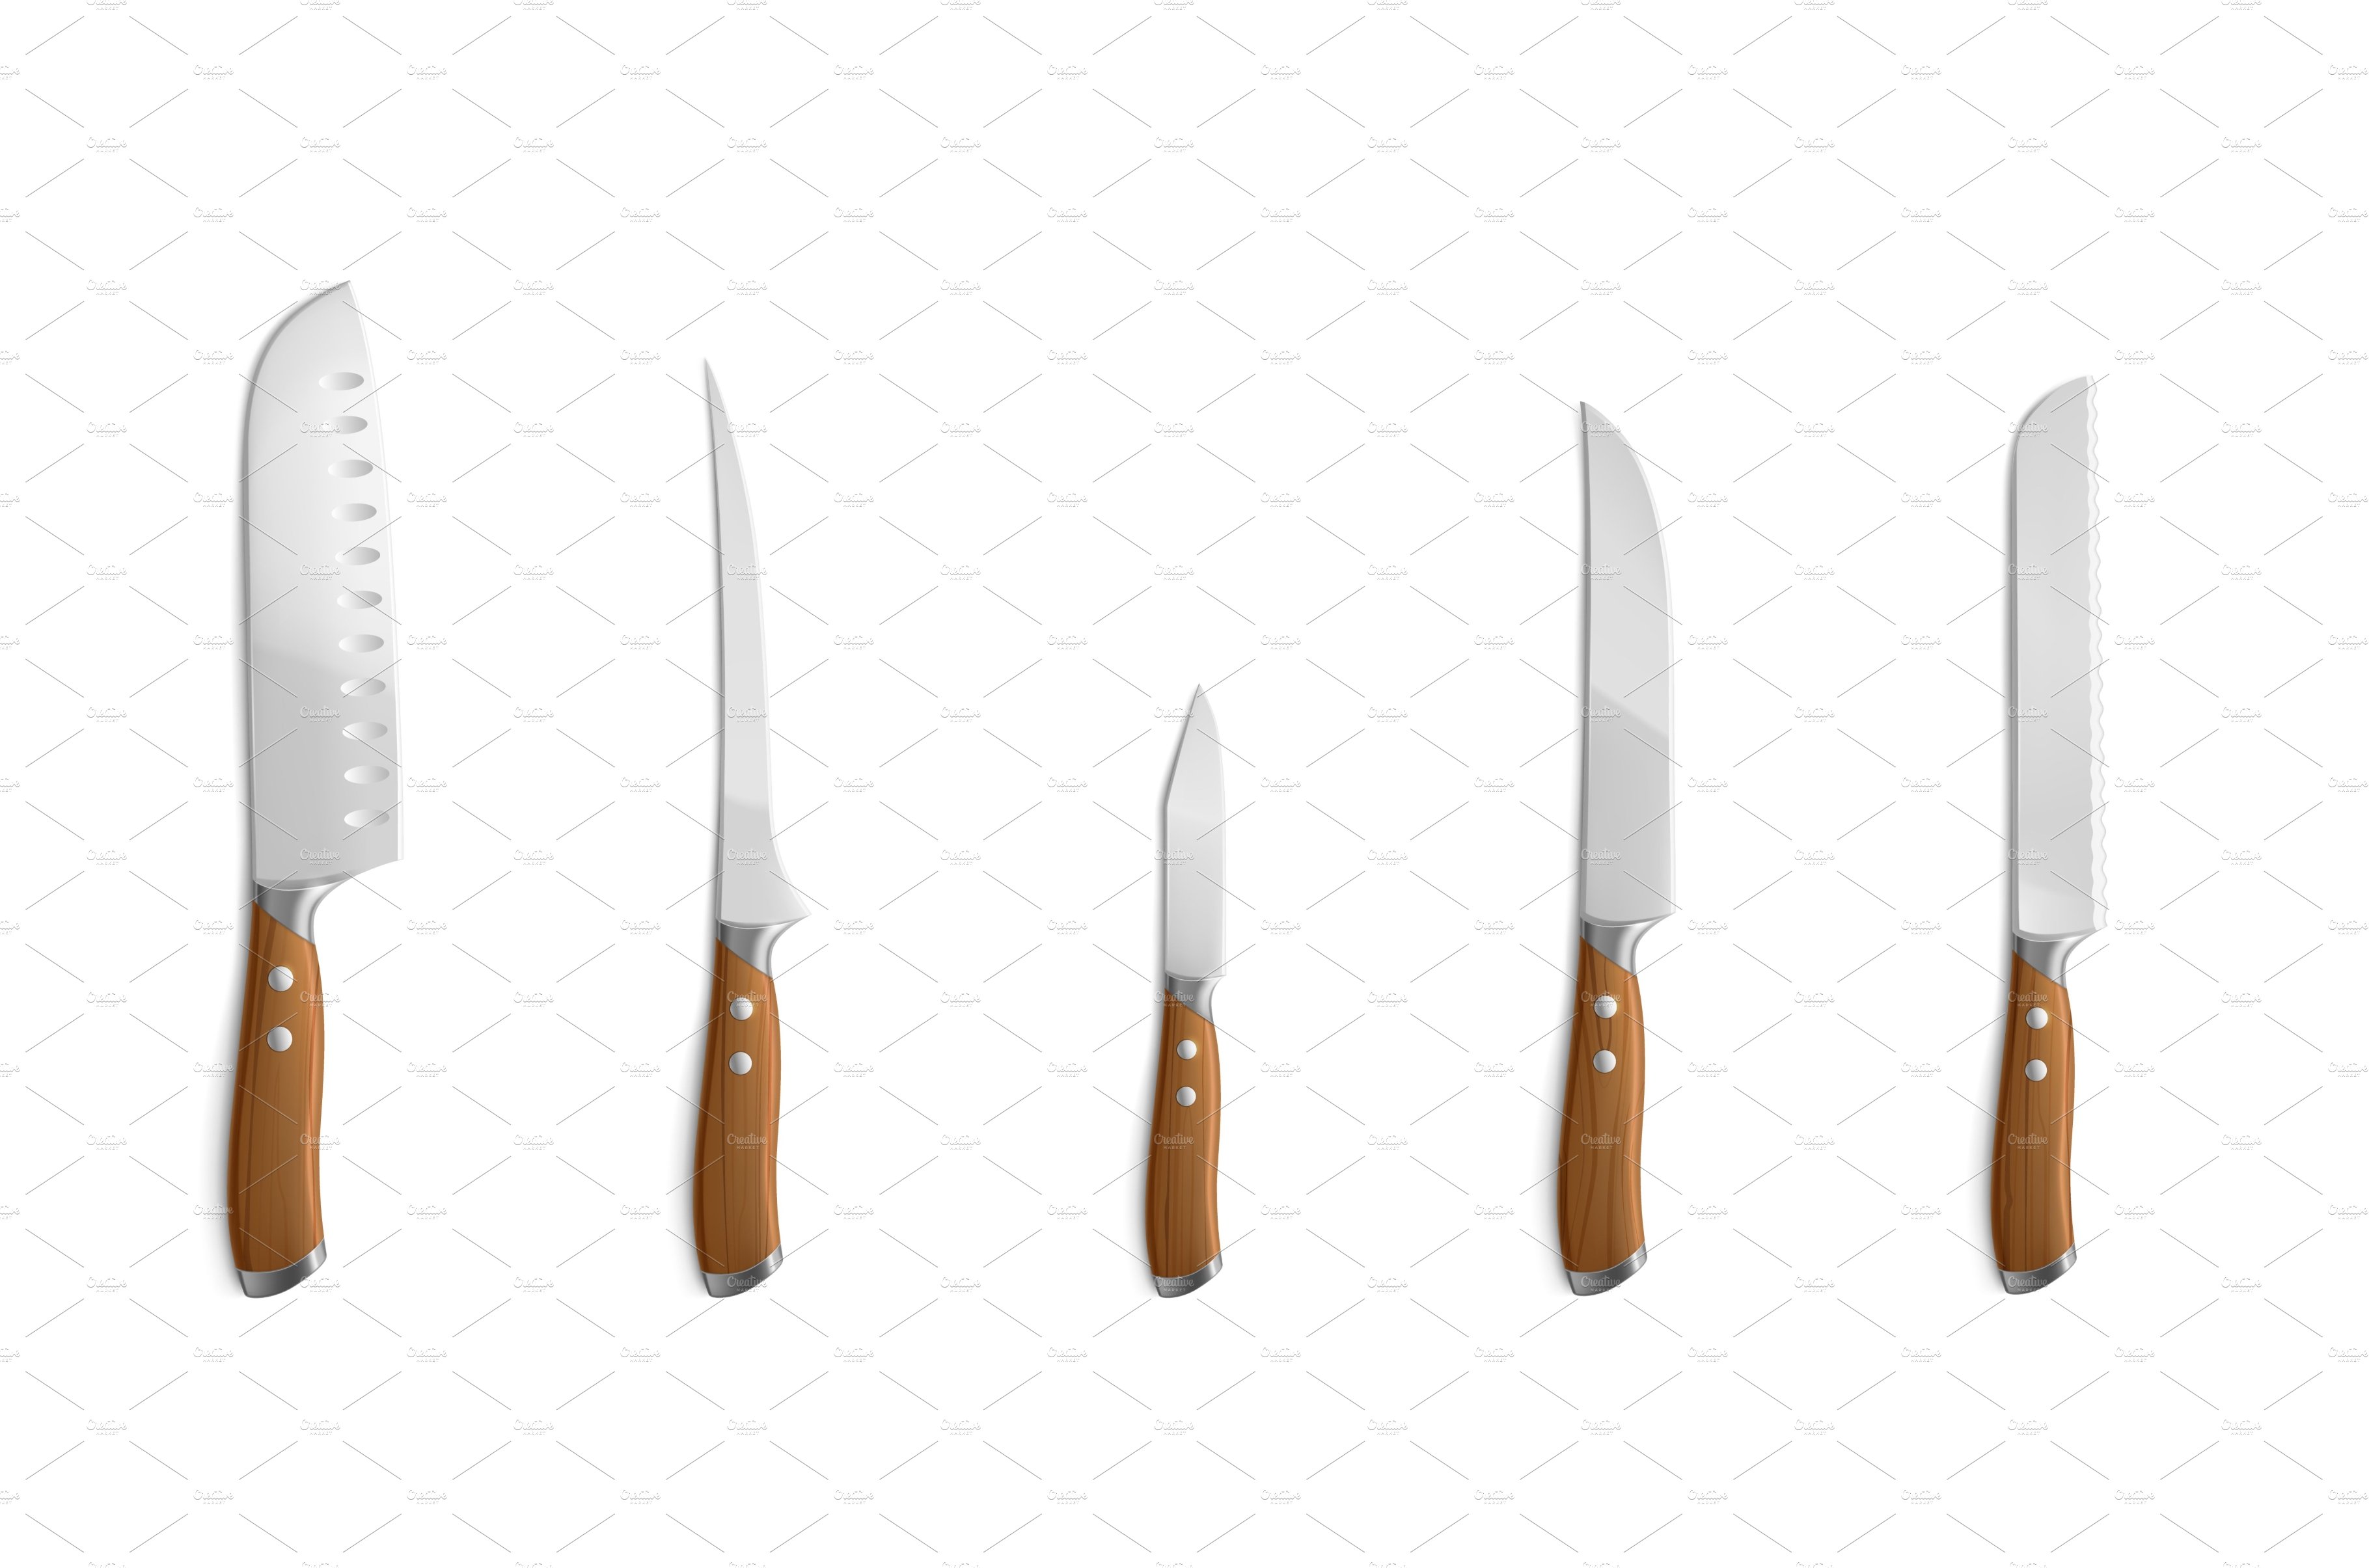 Chef knives, kitchen tools with cover image.